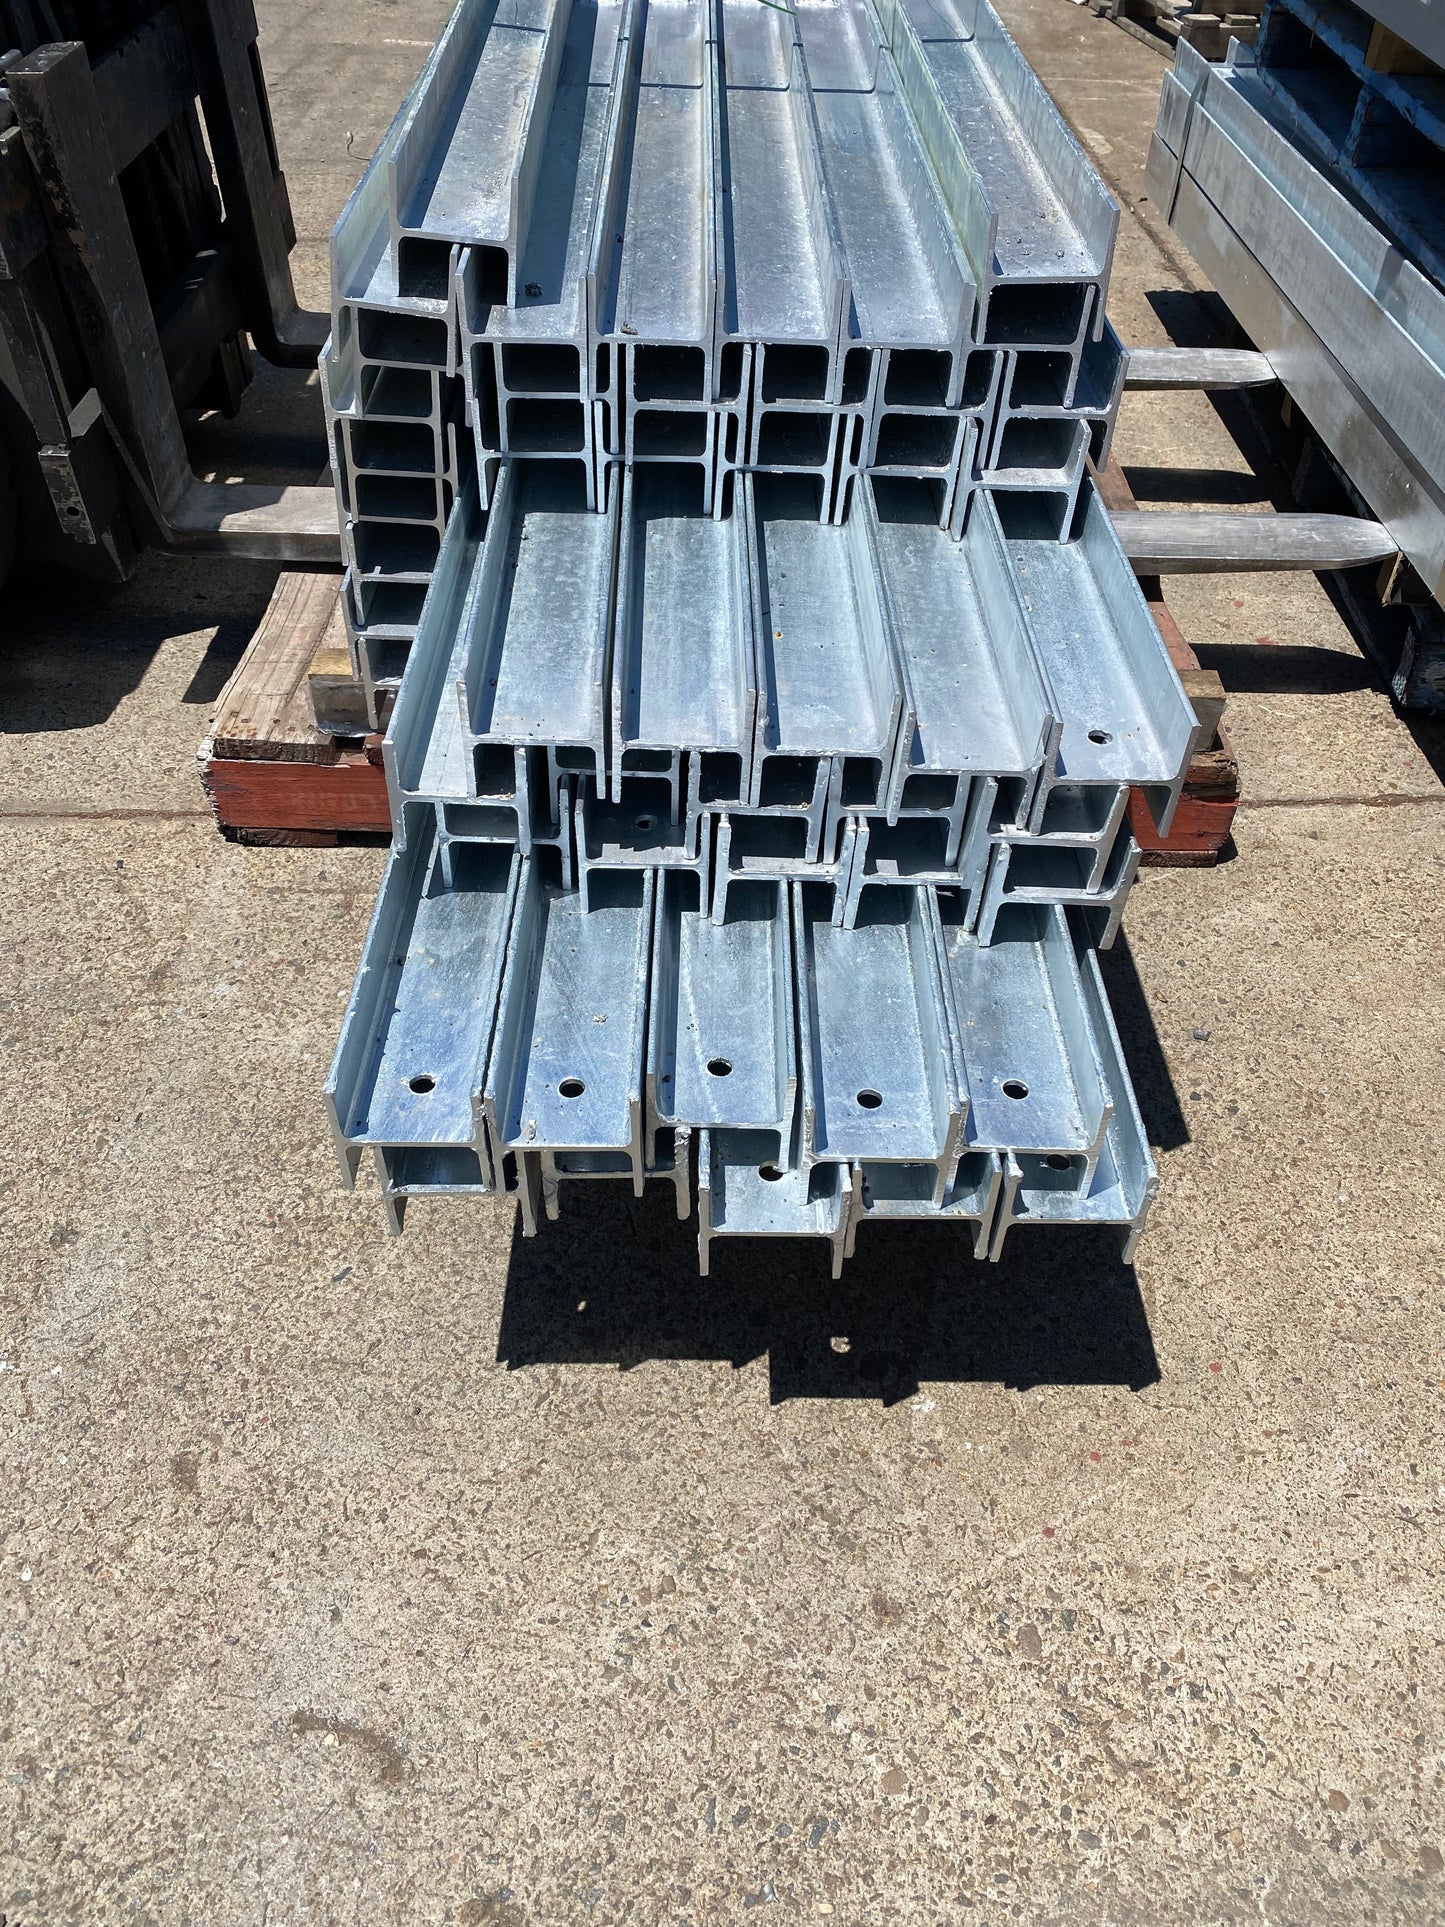 Hot Dipped Galvanized Steel Post for Retaining Walls (H Post, C Post, Corner Post)